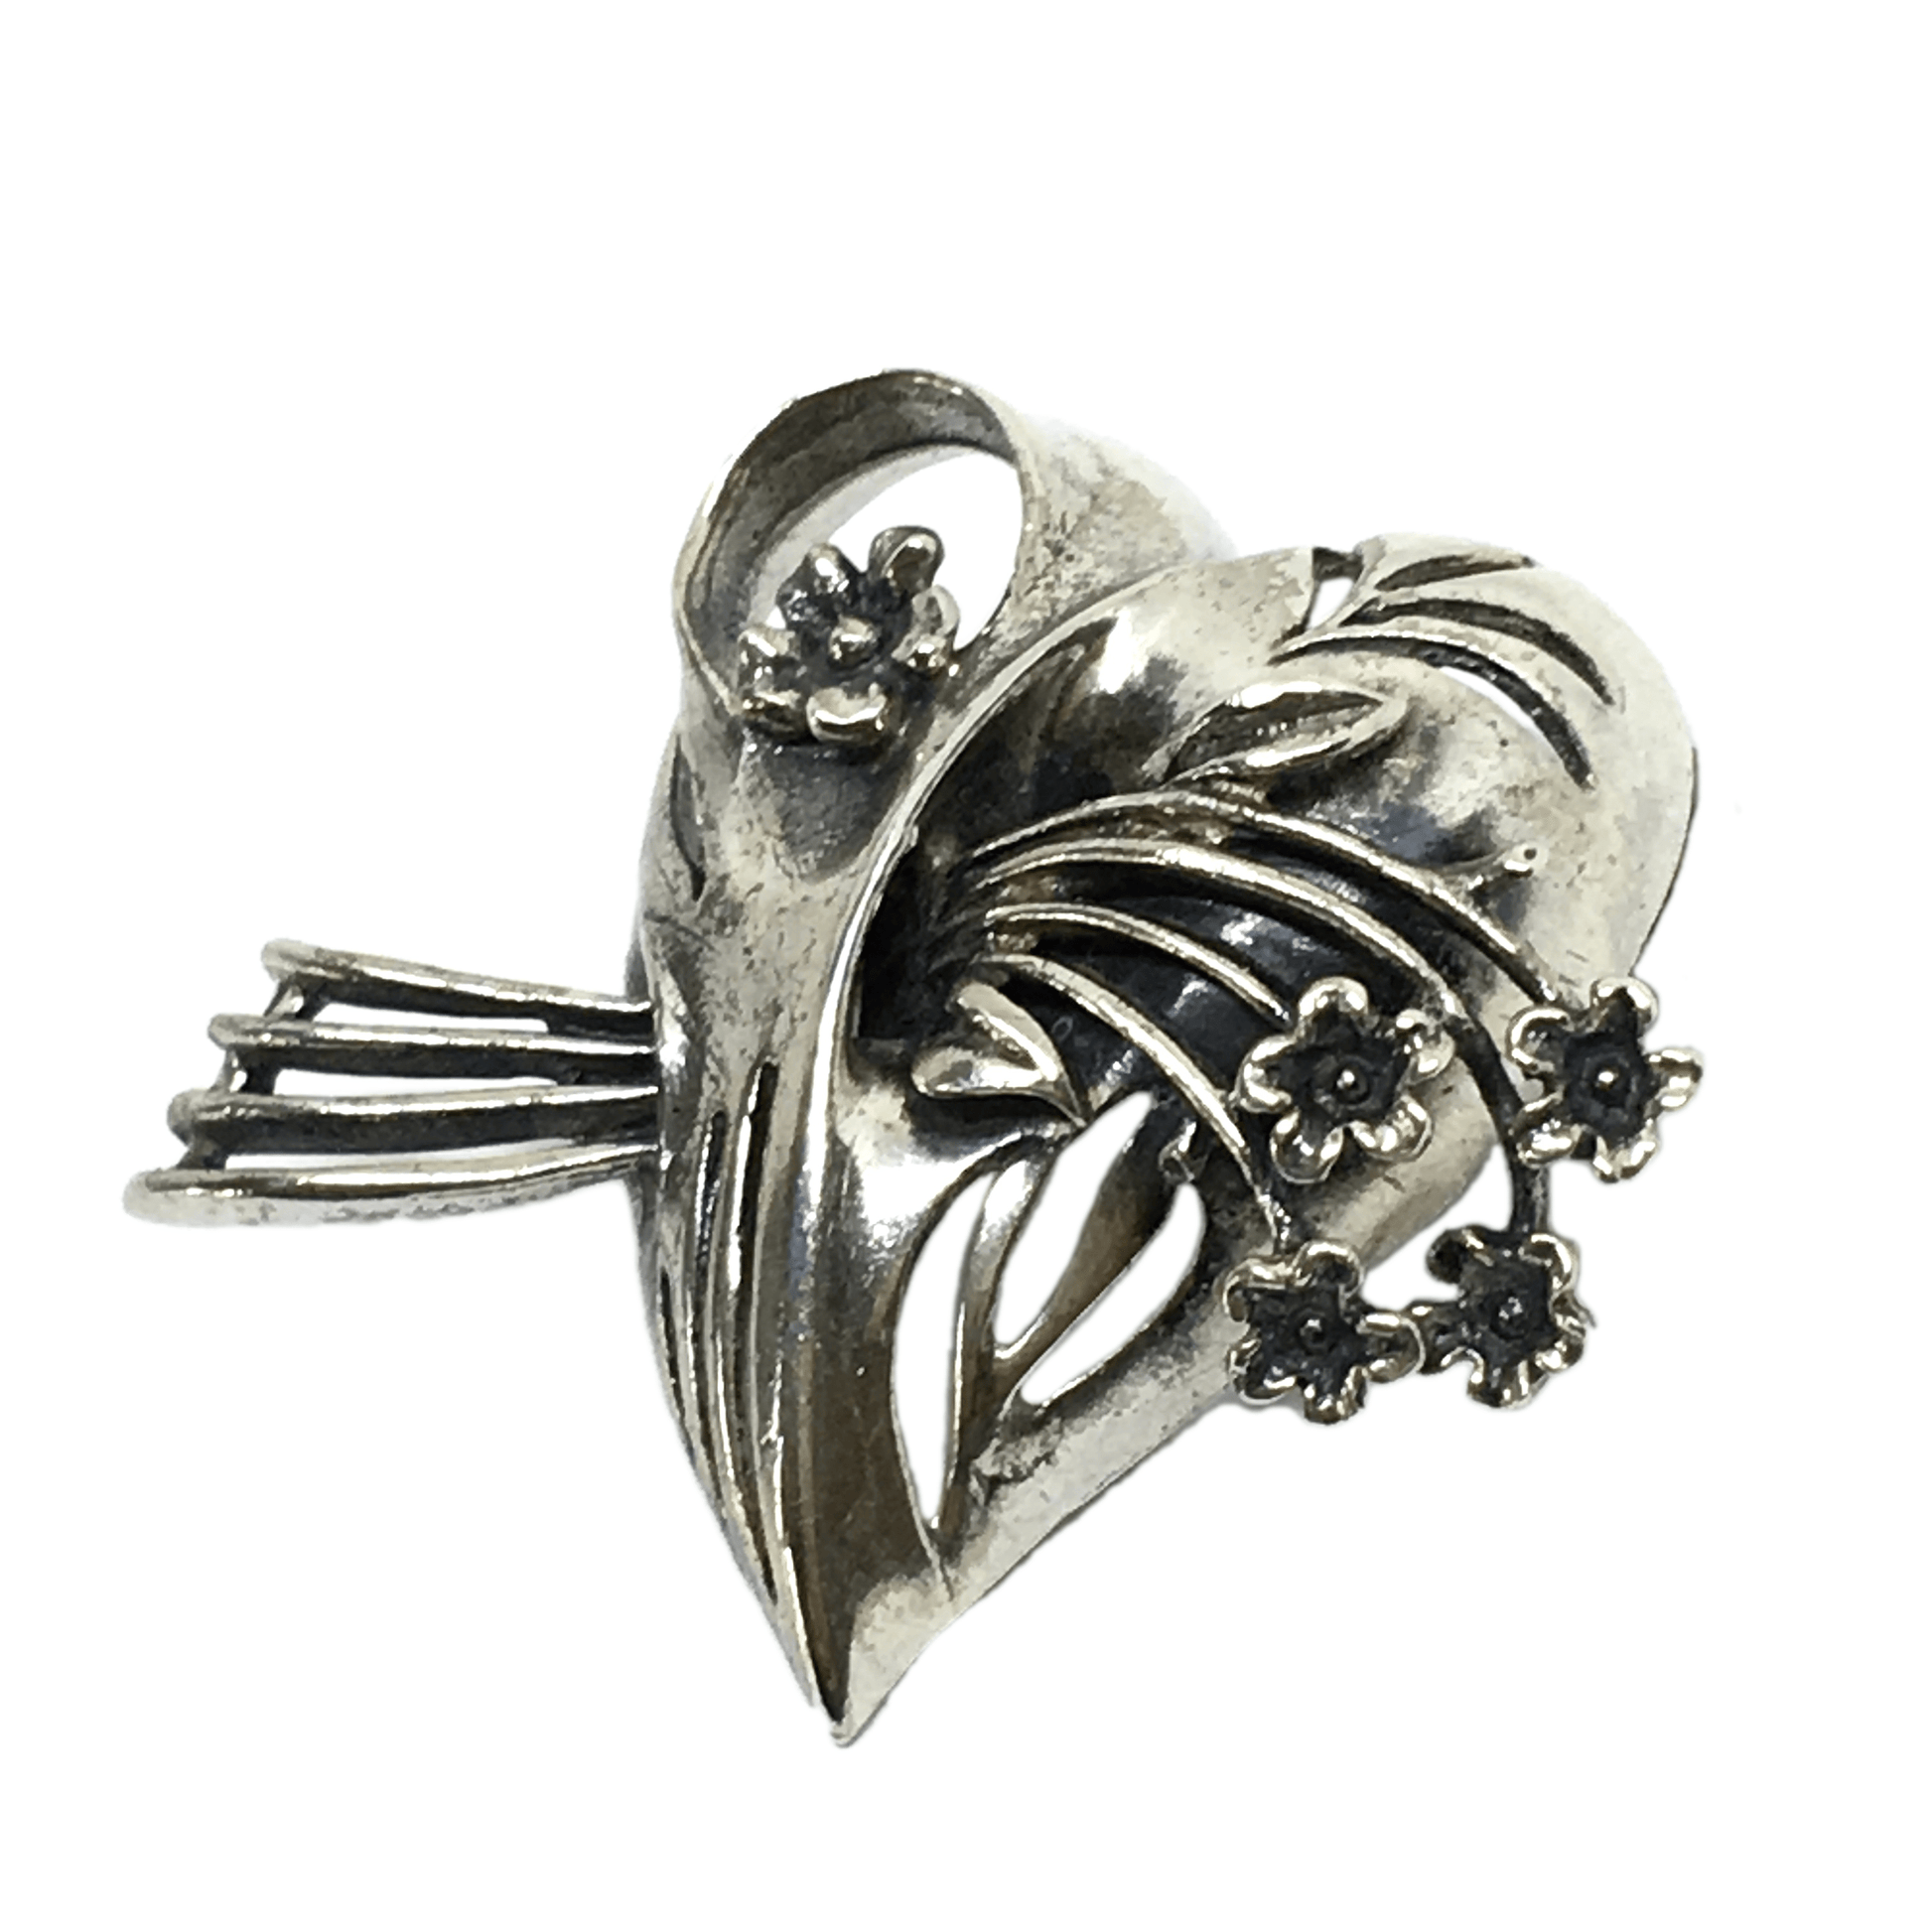 Brooches & Lapel Pins - Sterling Silver Dramatic 3D Style Broken Heart Brooch - Goth style Pin - Mens Womens Floral Statement Brooch